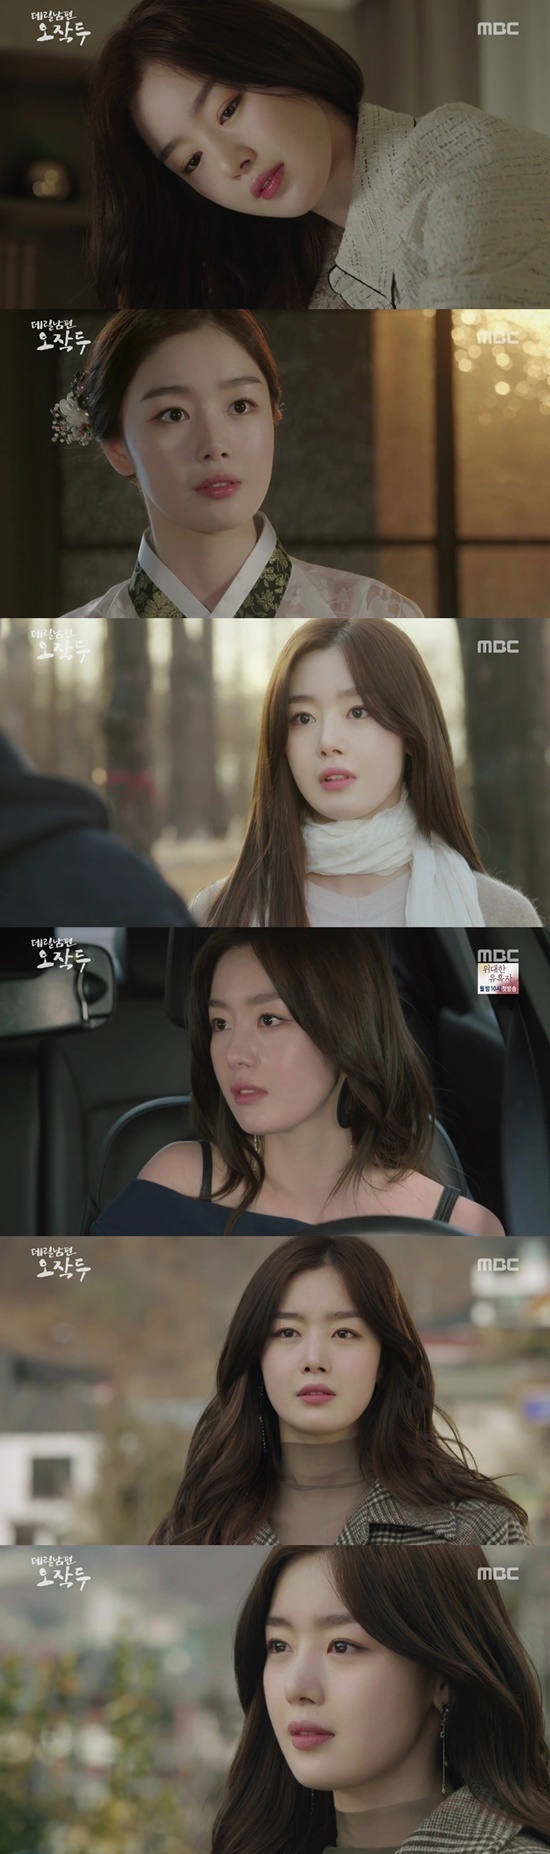 Darryl husband Ojakutsu Han Sunhwa announced a smooth first step.In the MBC weekend drama Darryl Husband Ojakutsu broadcasted on the 10th afternoon, Han Sunhwa first appeared as a star country music chairman and first evoked subtle tension and curiosity from the center of the play.Acting also moved the hearts of the viewers firmly.